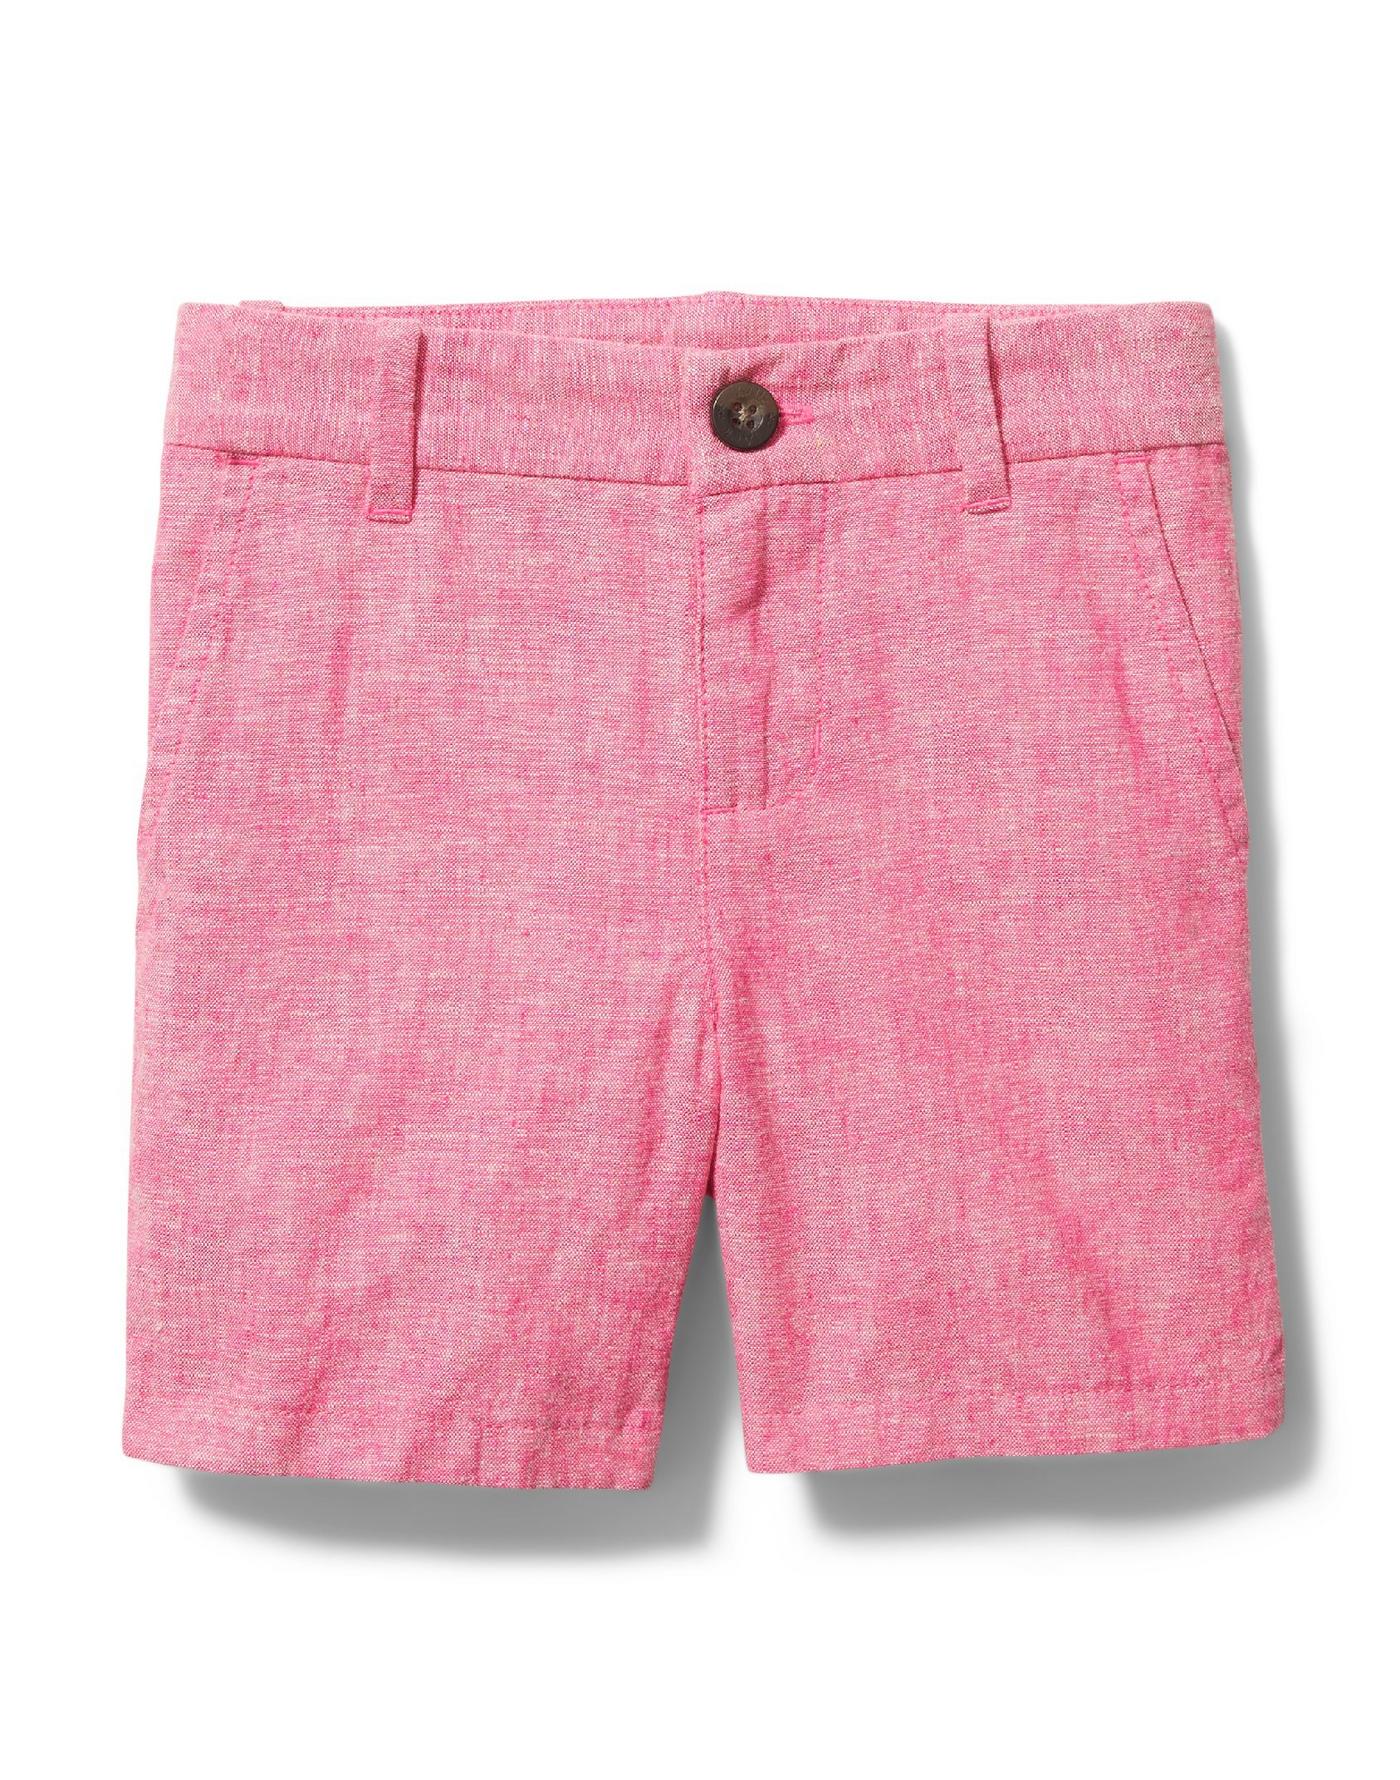 twin matching spring matches, pink shorts